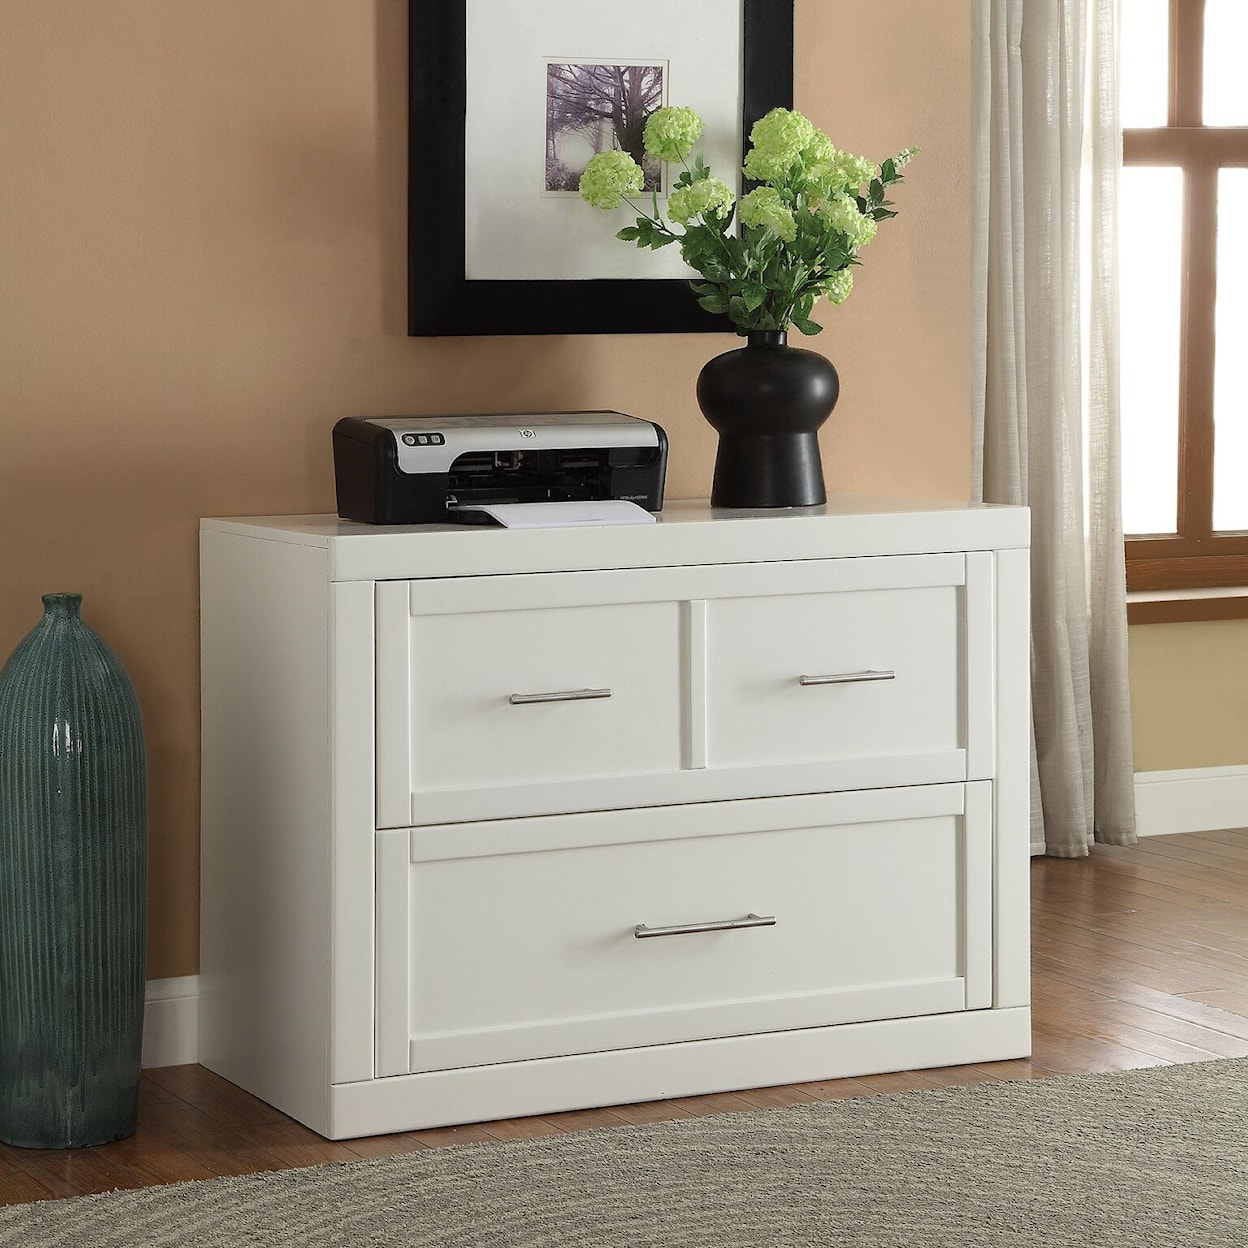 Parker House Catalina 40" Lateral File